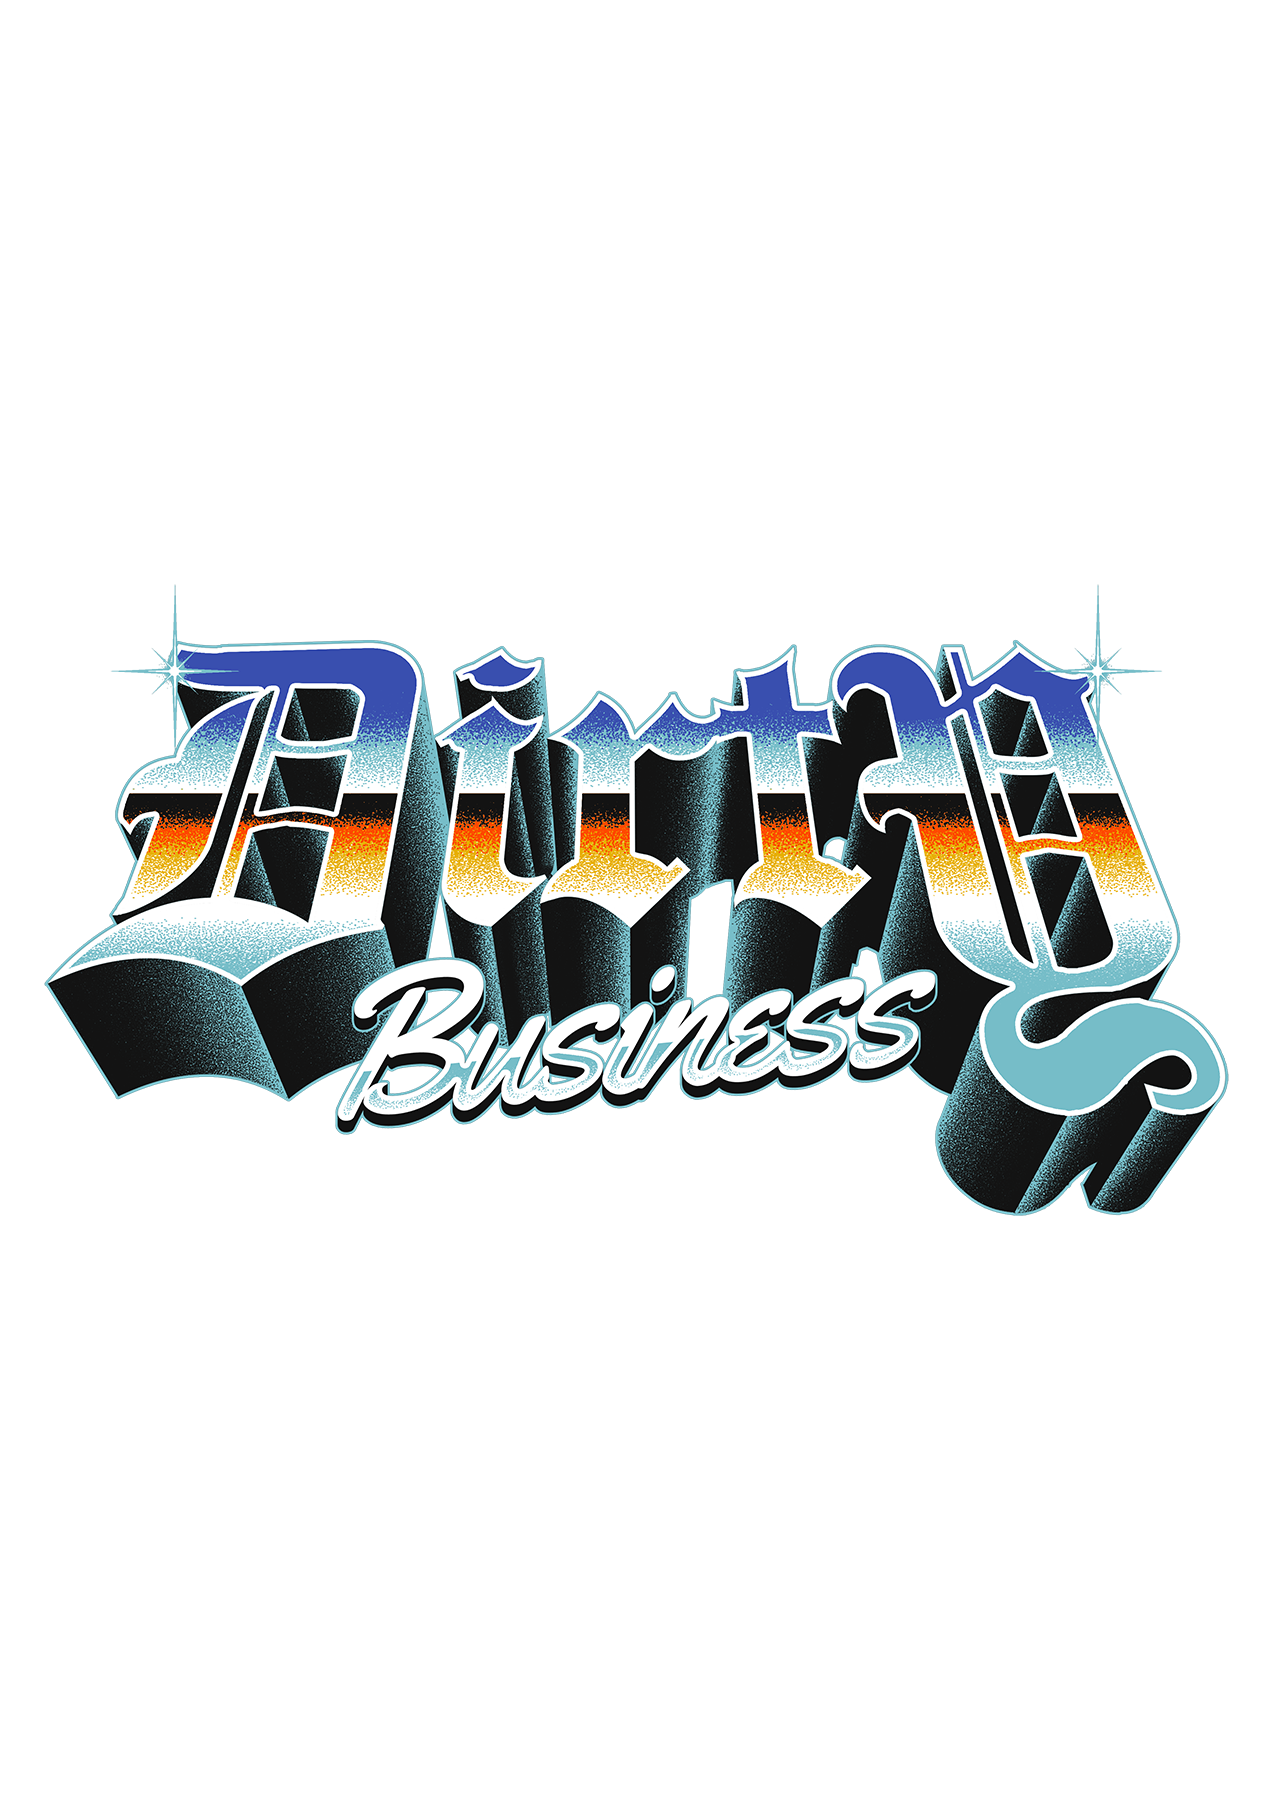 Dirty Business Co